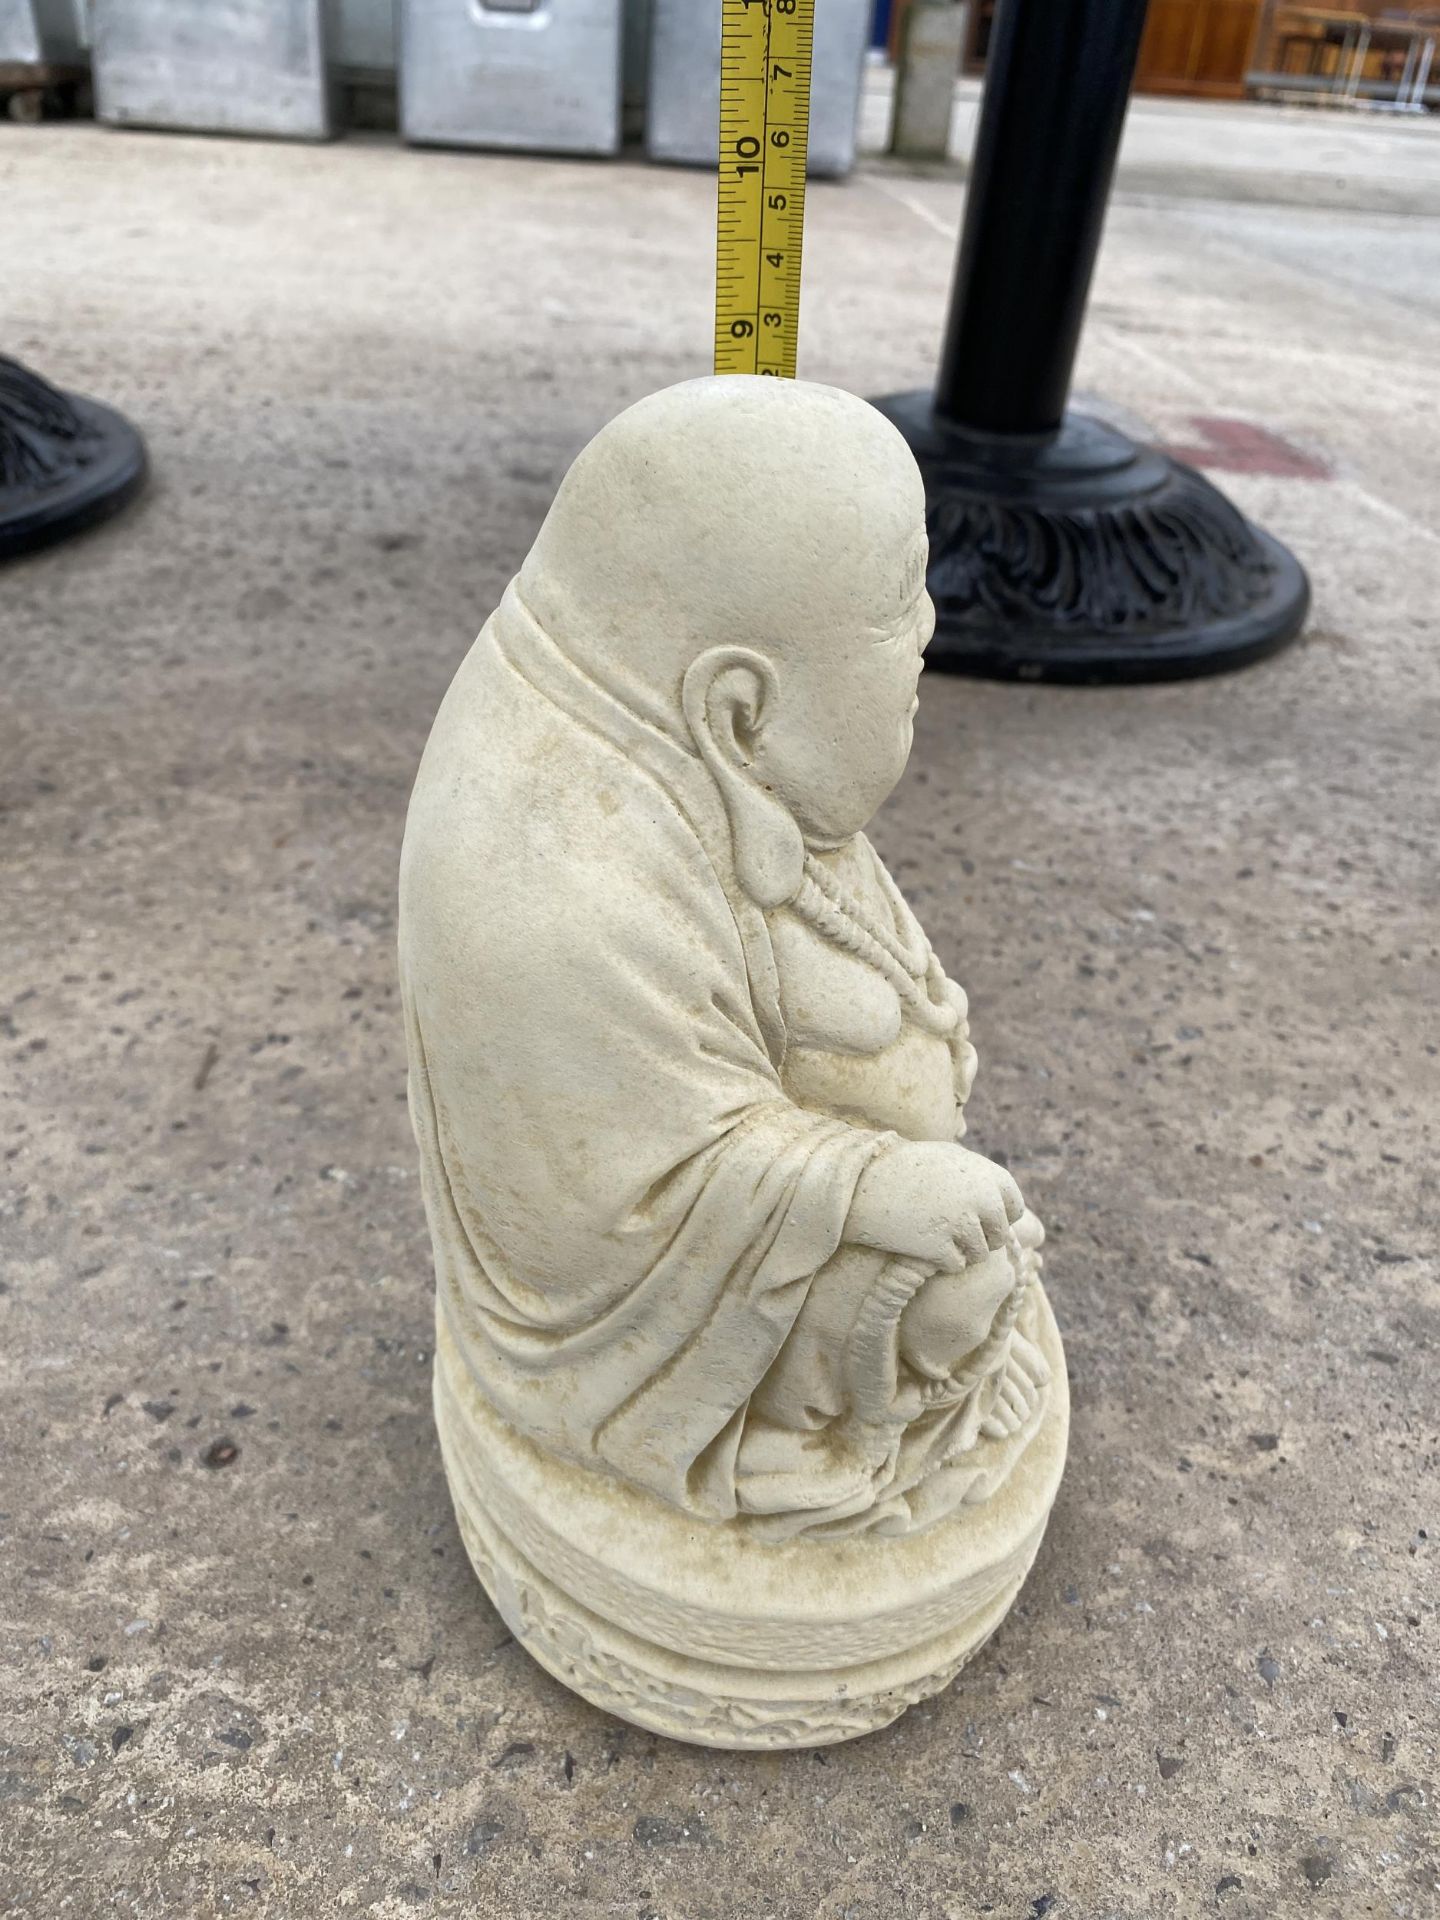 AN AS NEW EX DISPLAY CONCRETE 'SMALL BUDDHA' STATUE *PLEASE NOTE VAT TO BE PAID ON THIS ITEM* - Image 4 of 4